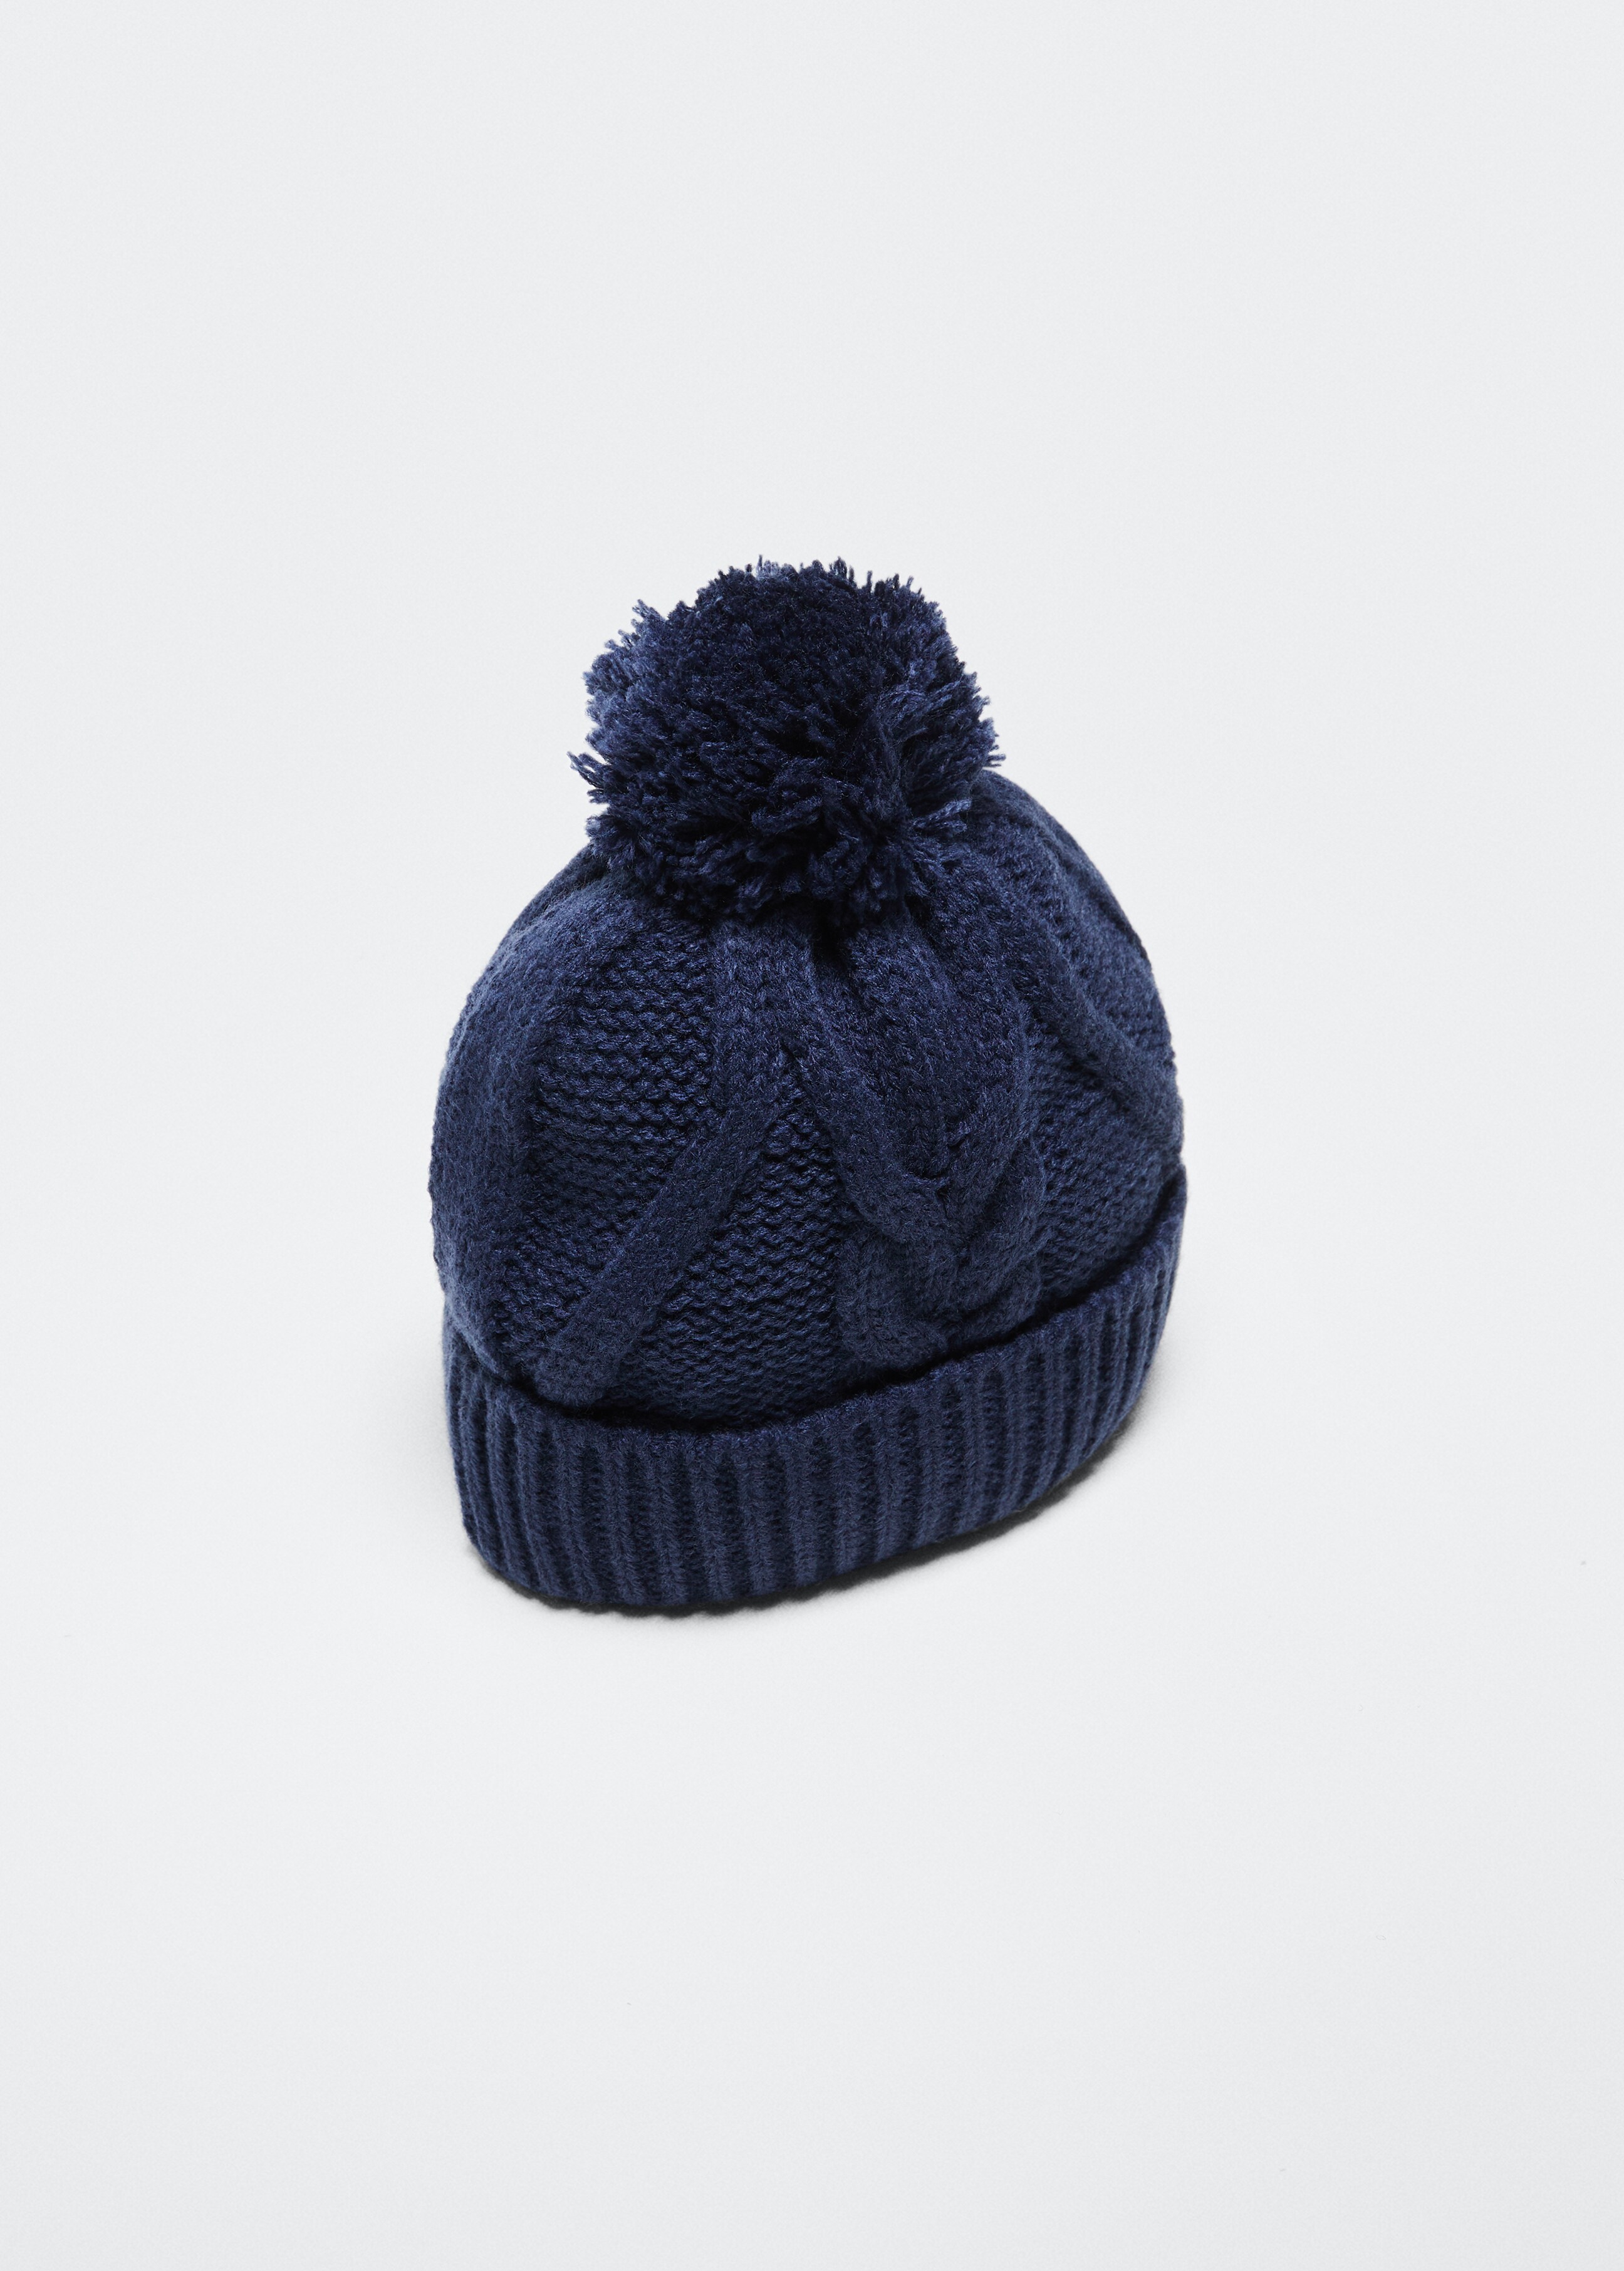 Knitted braided hat - Details of the article 2